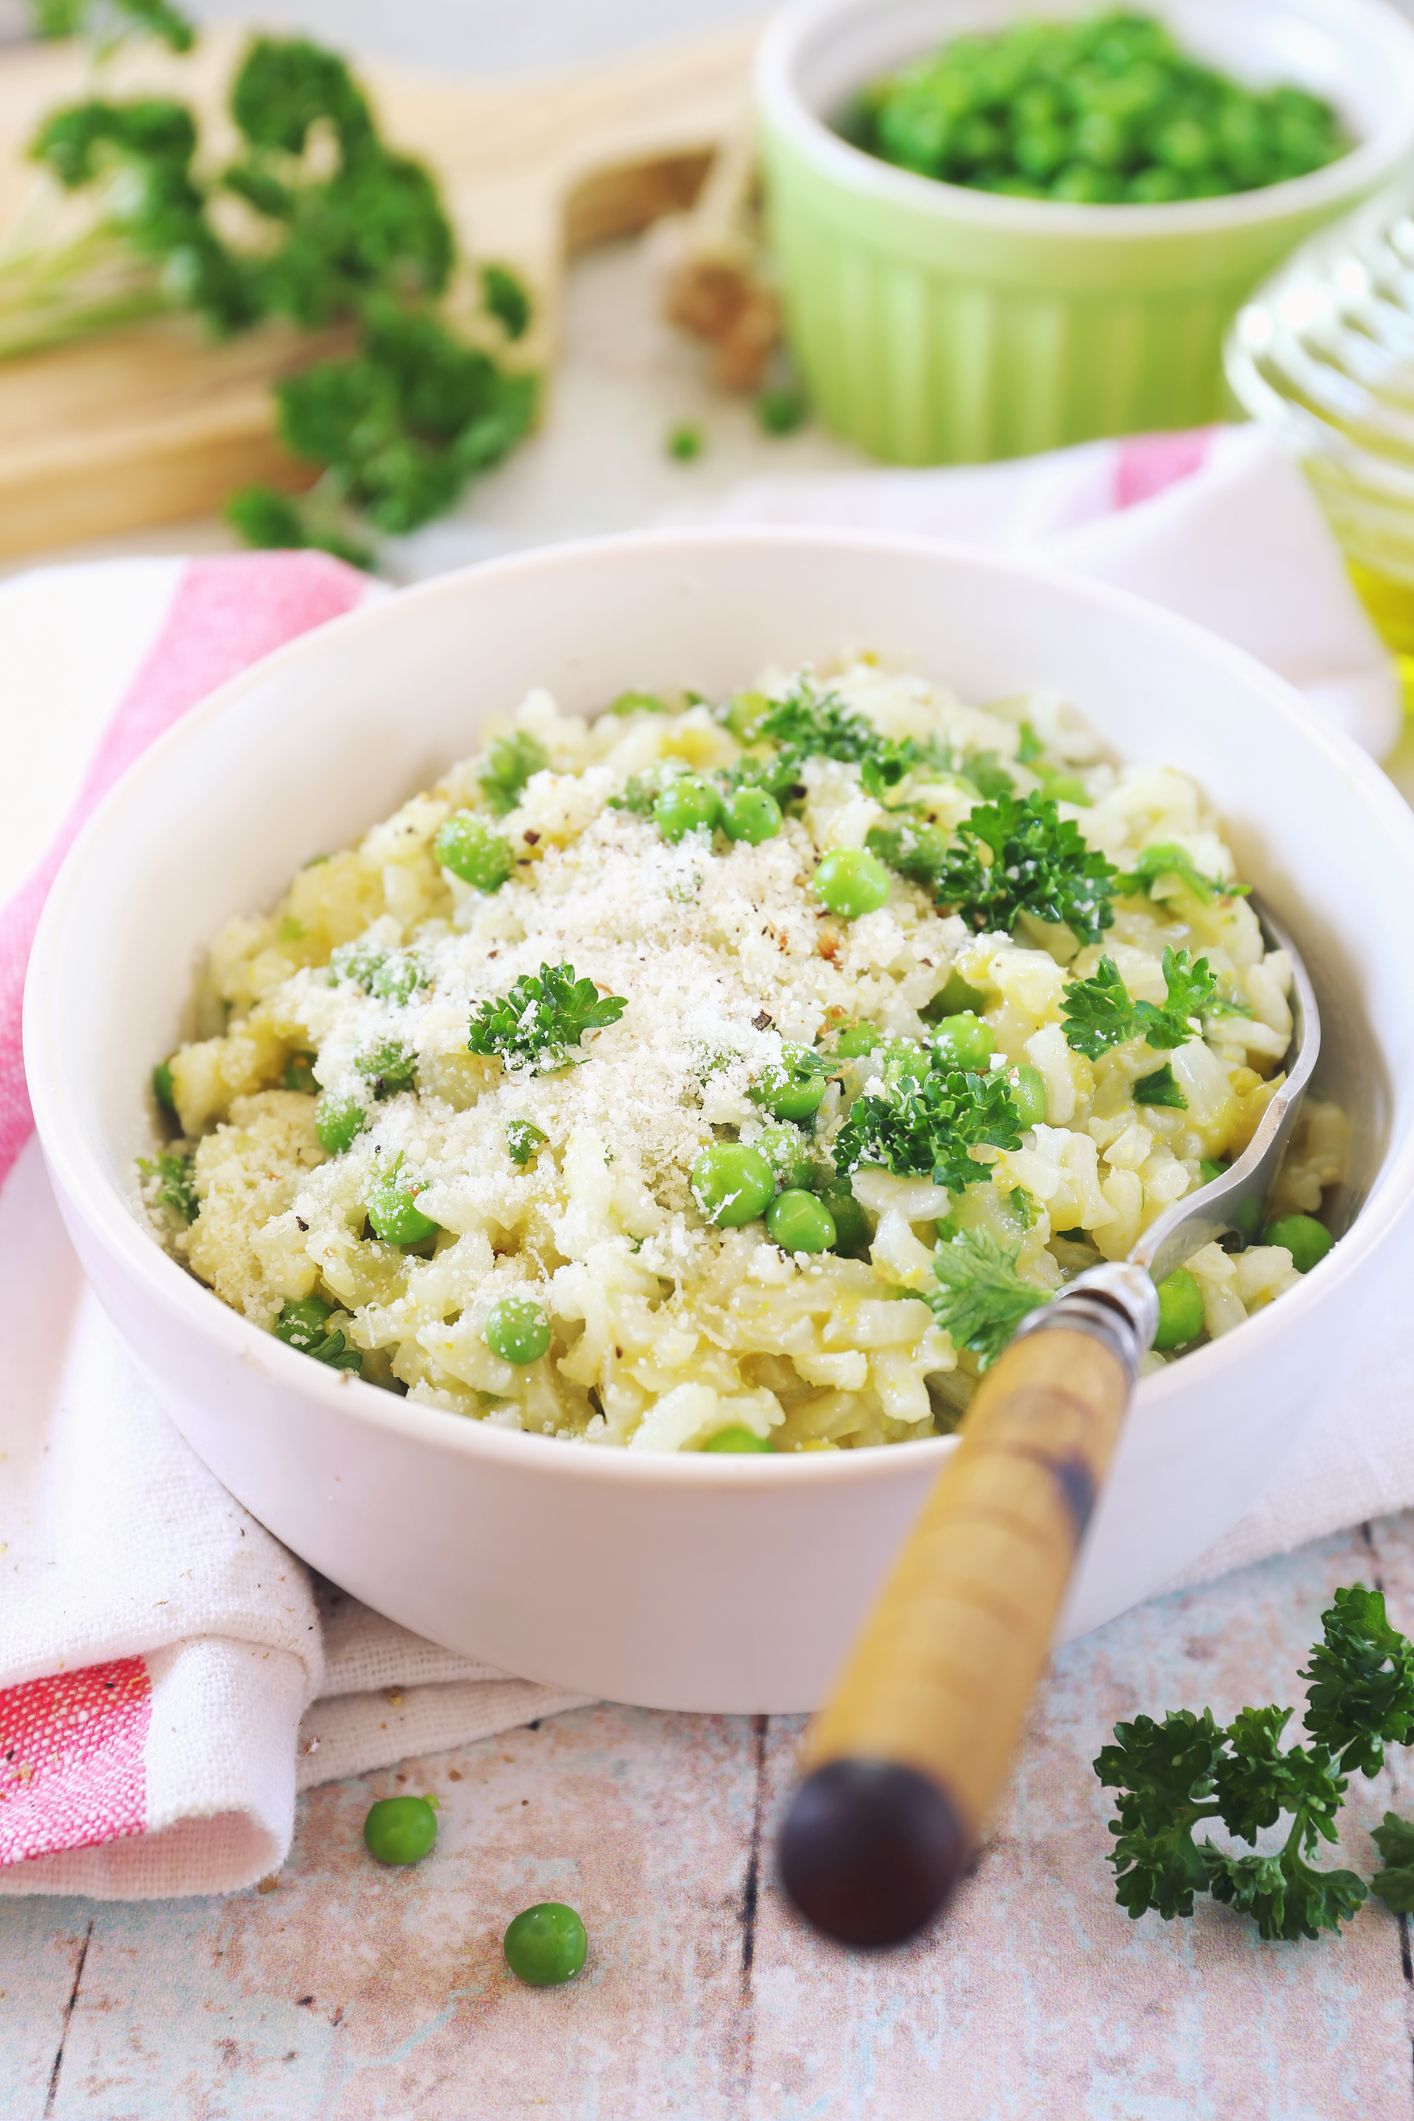 https://hips.hearstapps.com/hmg-prod/images/italian-cuisine-green-pea-risotto-parmesan-cheese-royalty-free-image-1598390127.jpg